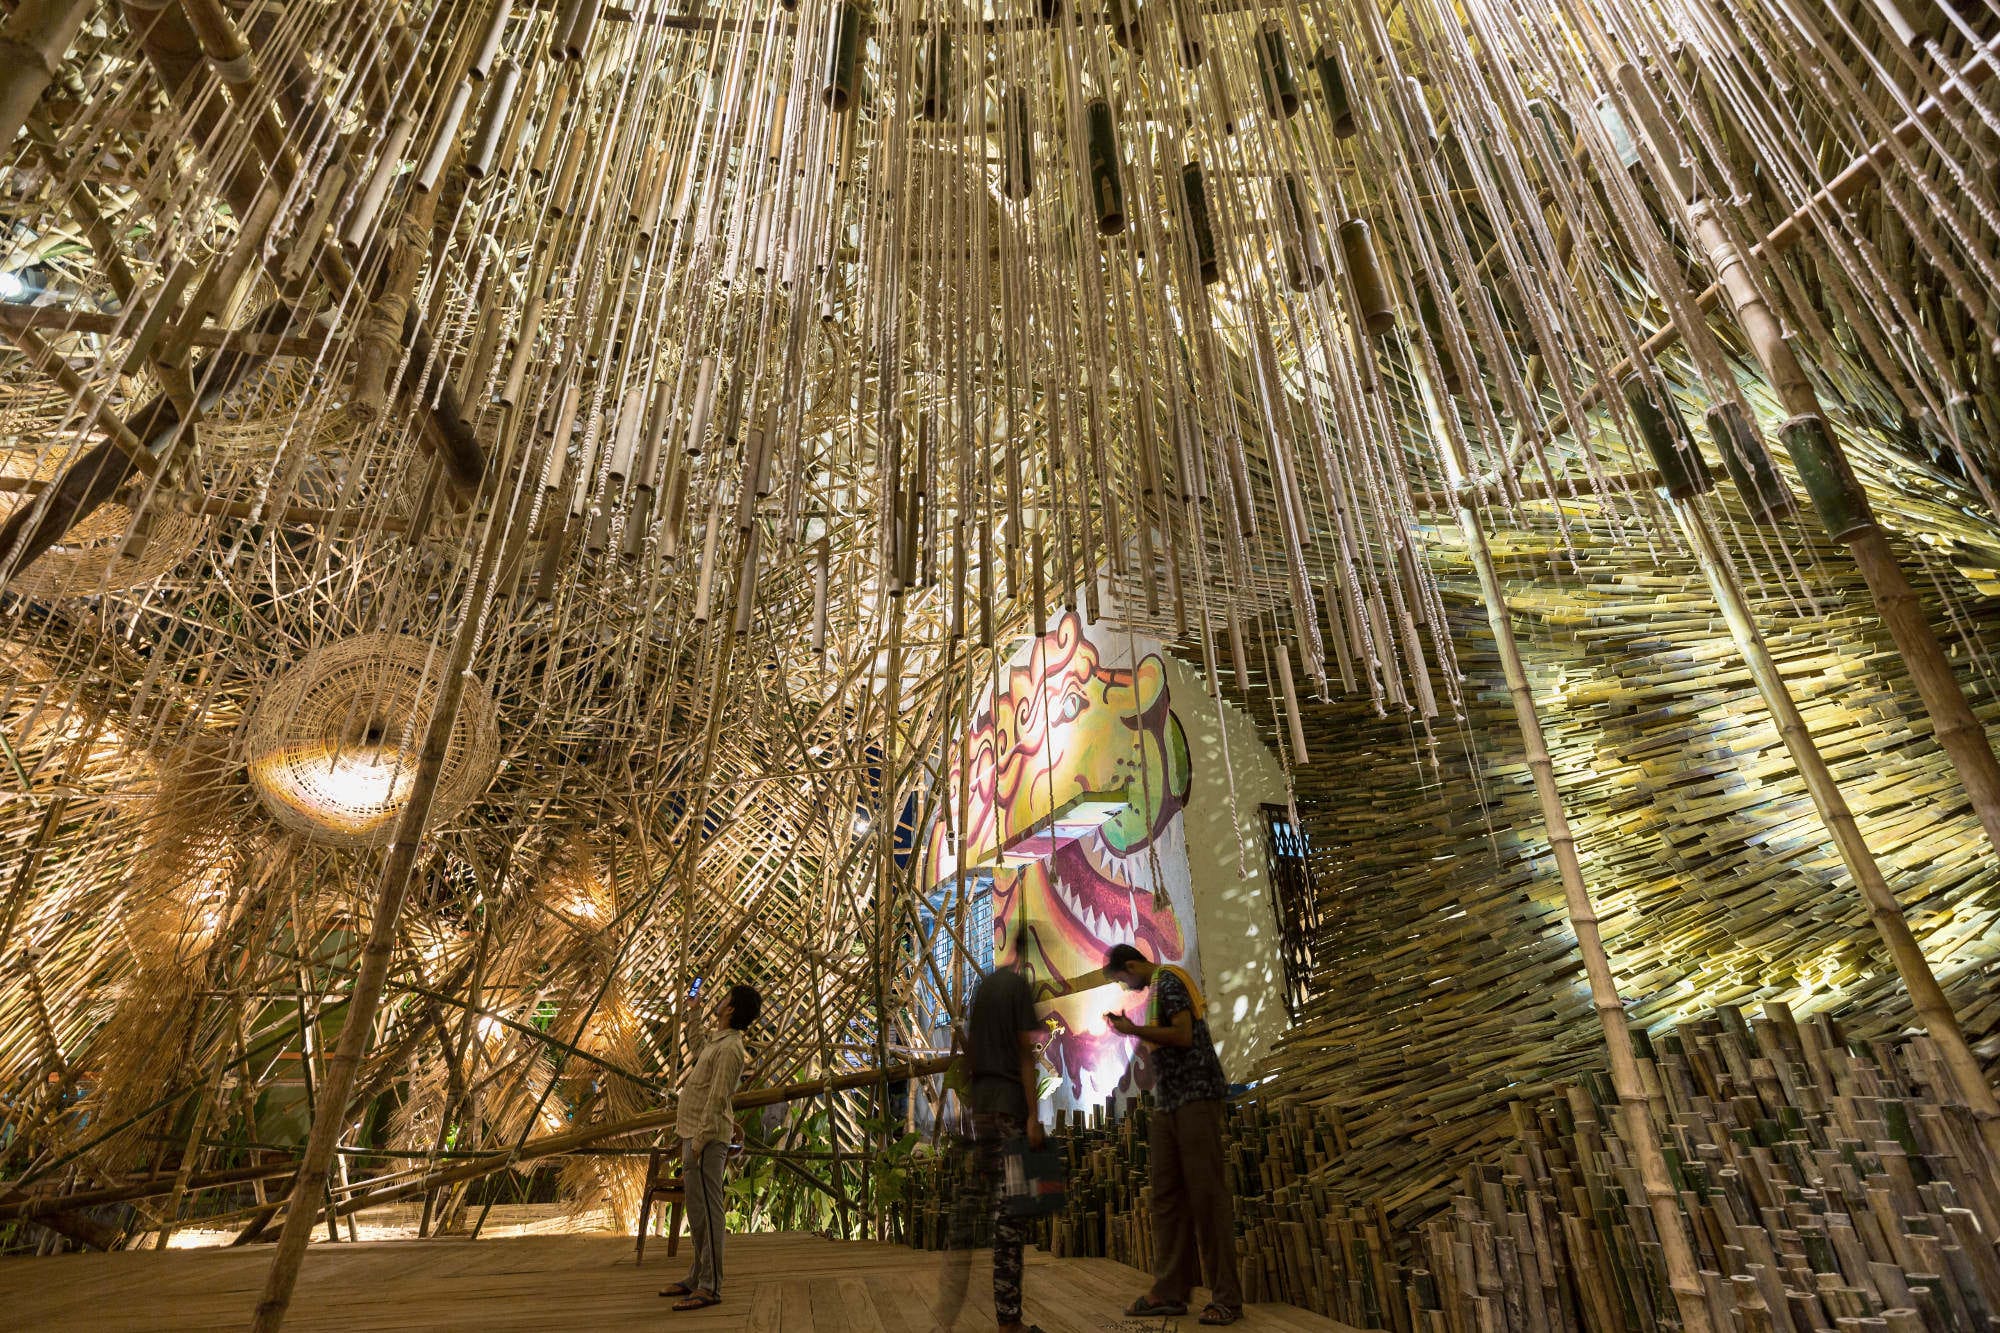 people wander through a large bamboo installation